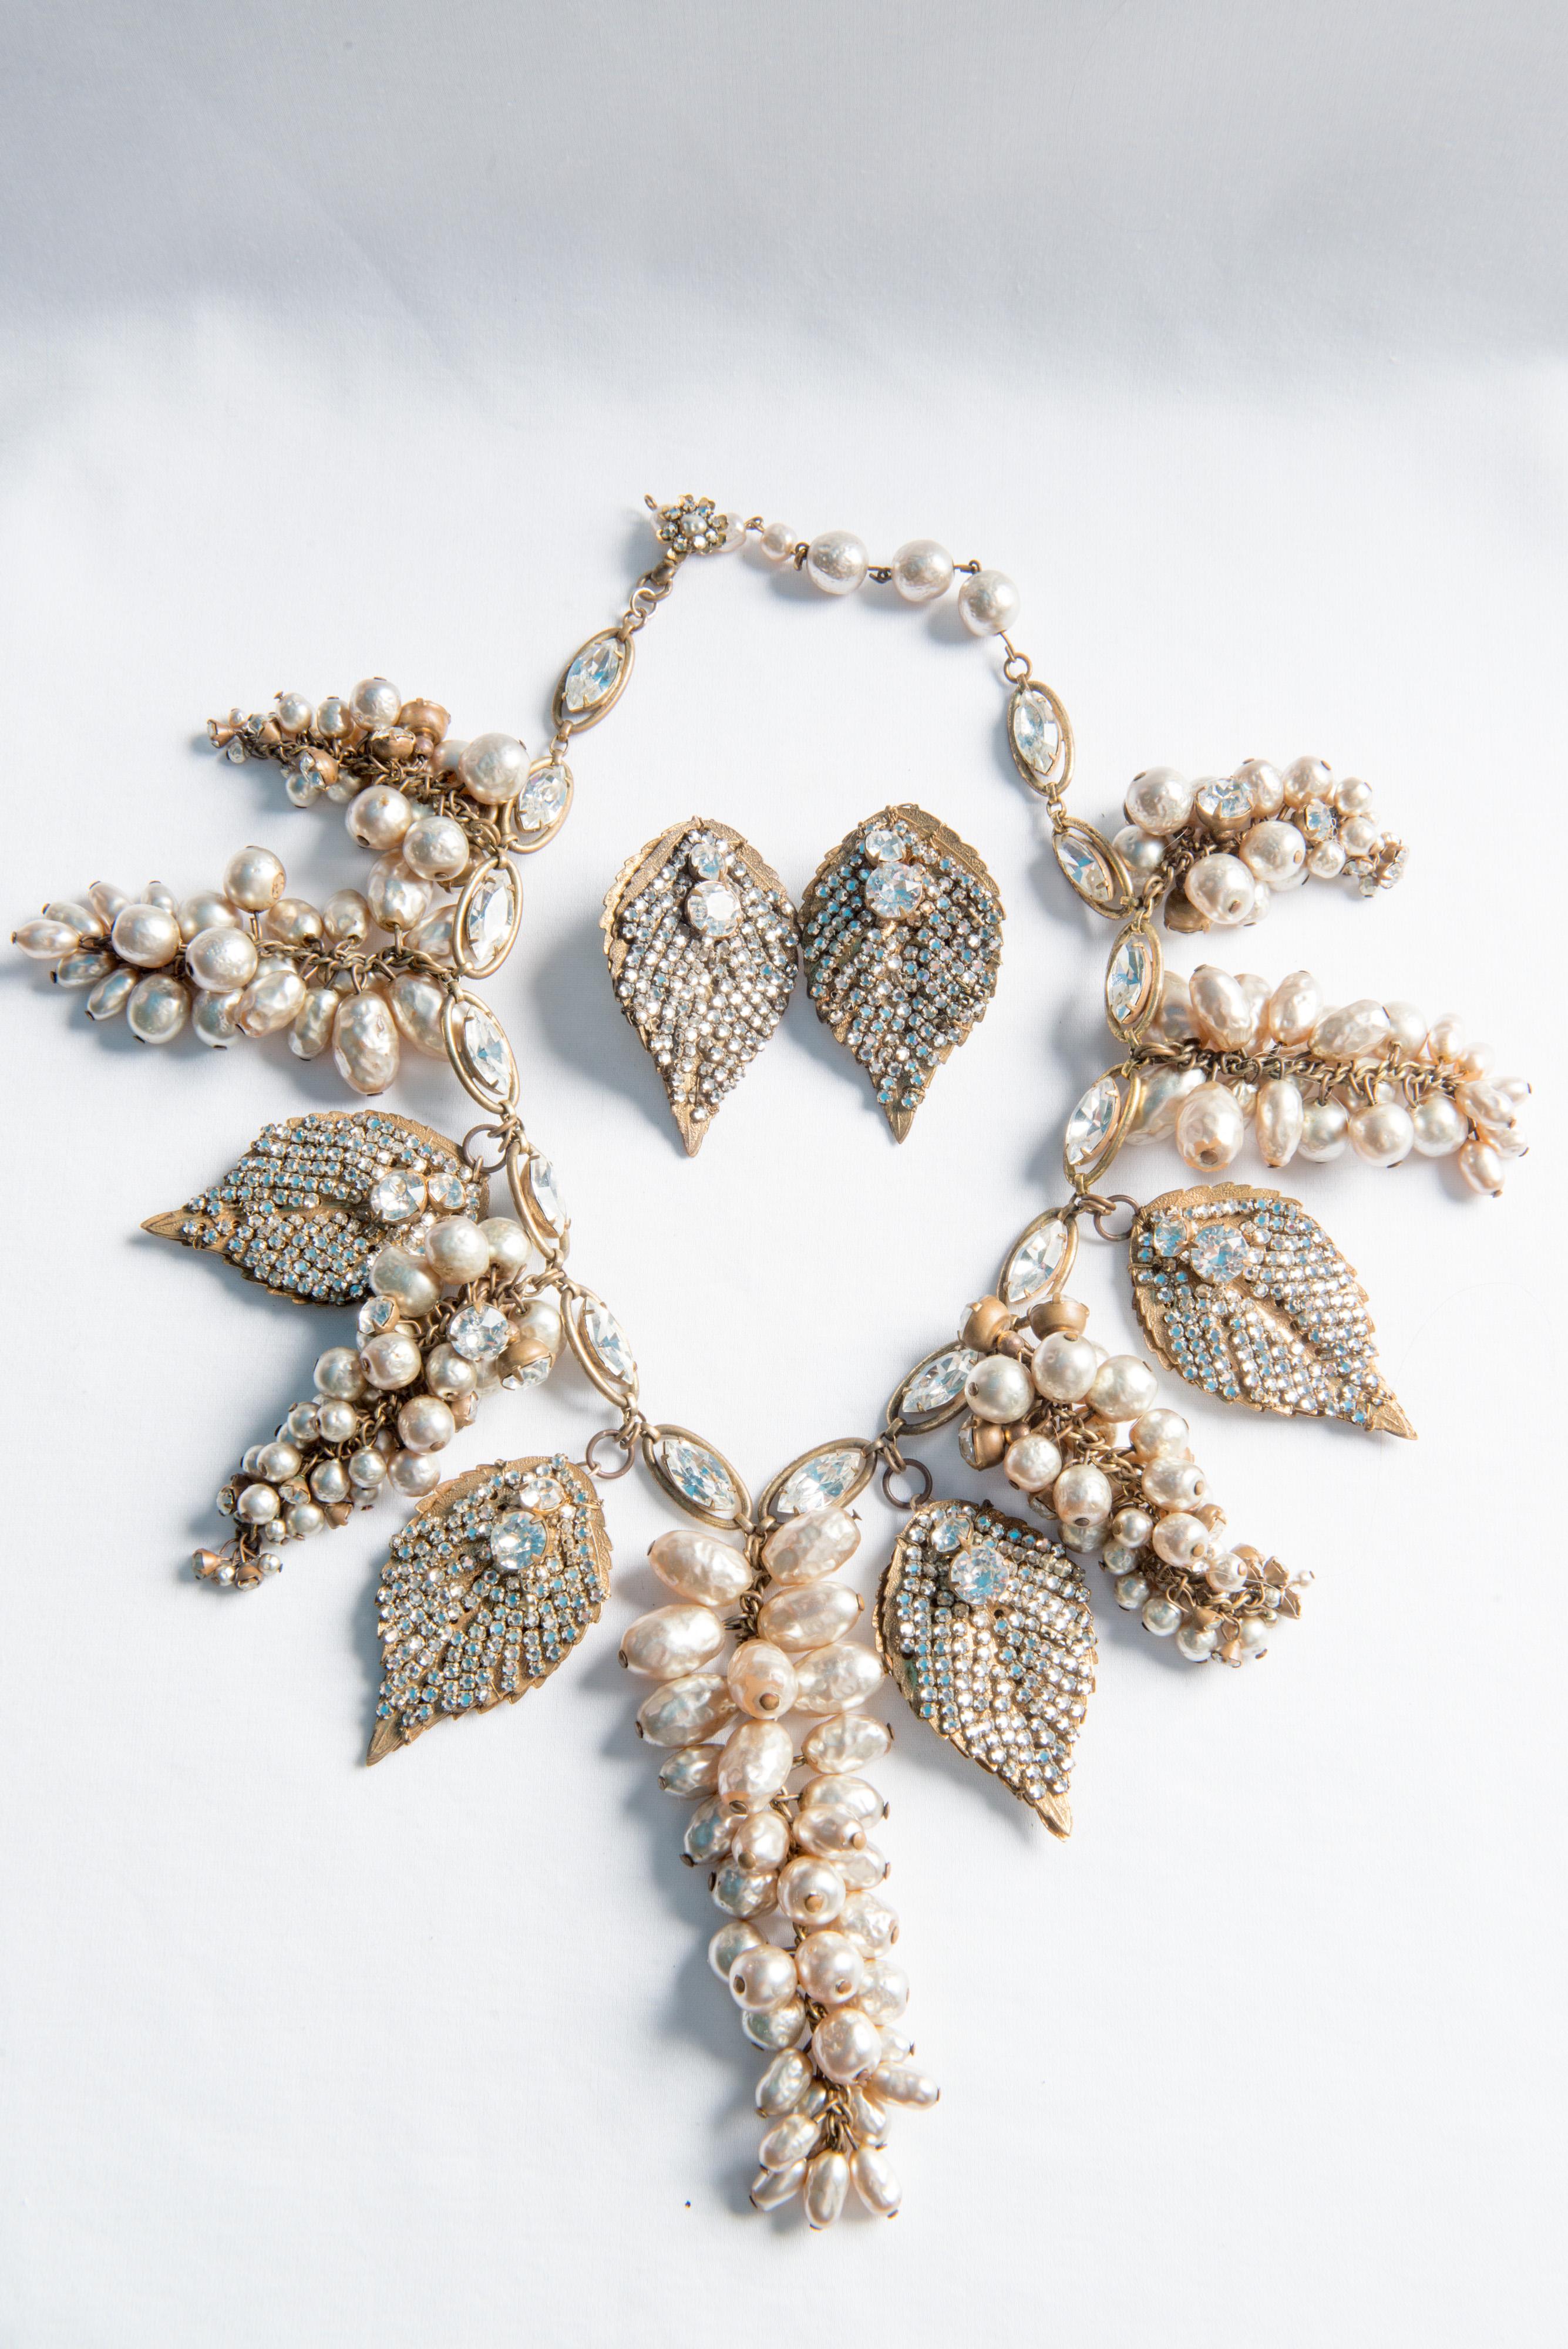 Women's Miriam Haskell Rhinestone and Pearl Leaf Necklace, Earring Set